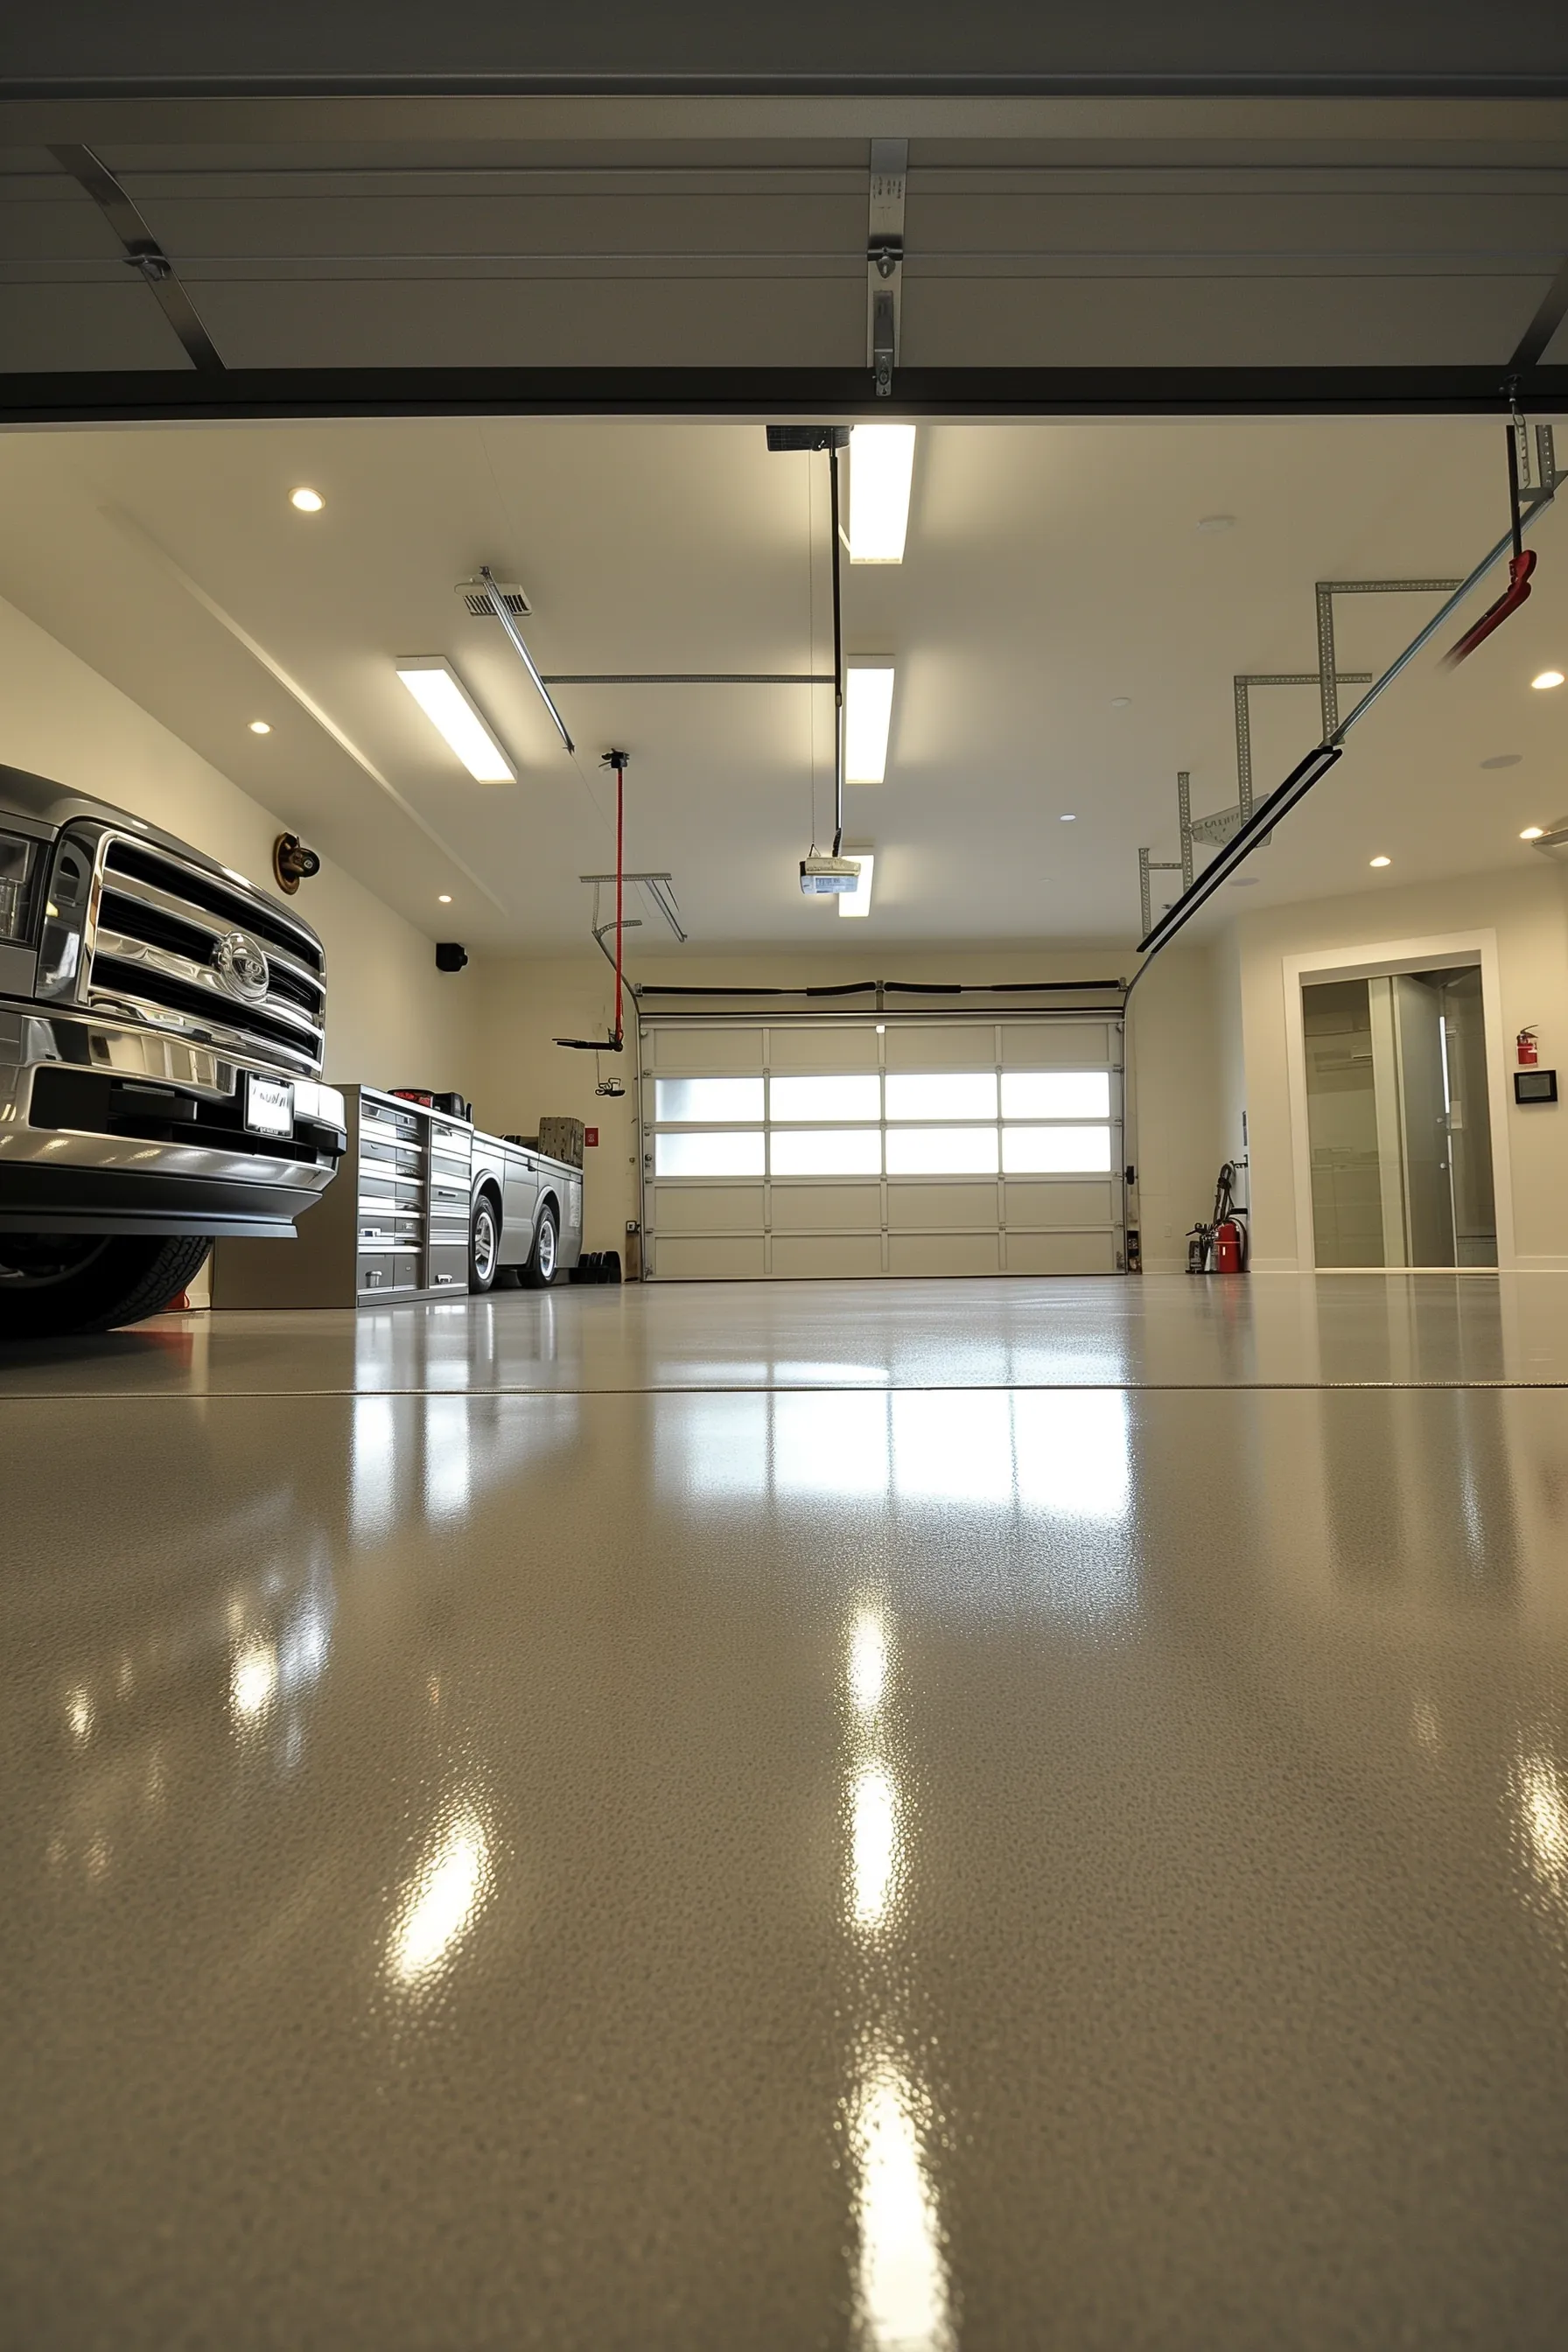 epoxy floor stain with car in garage